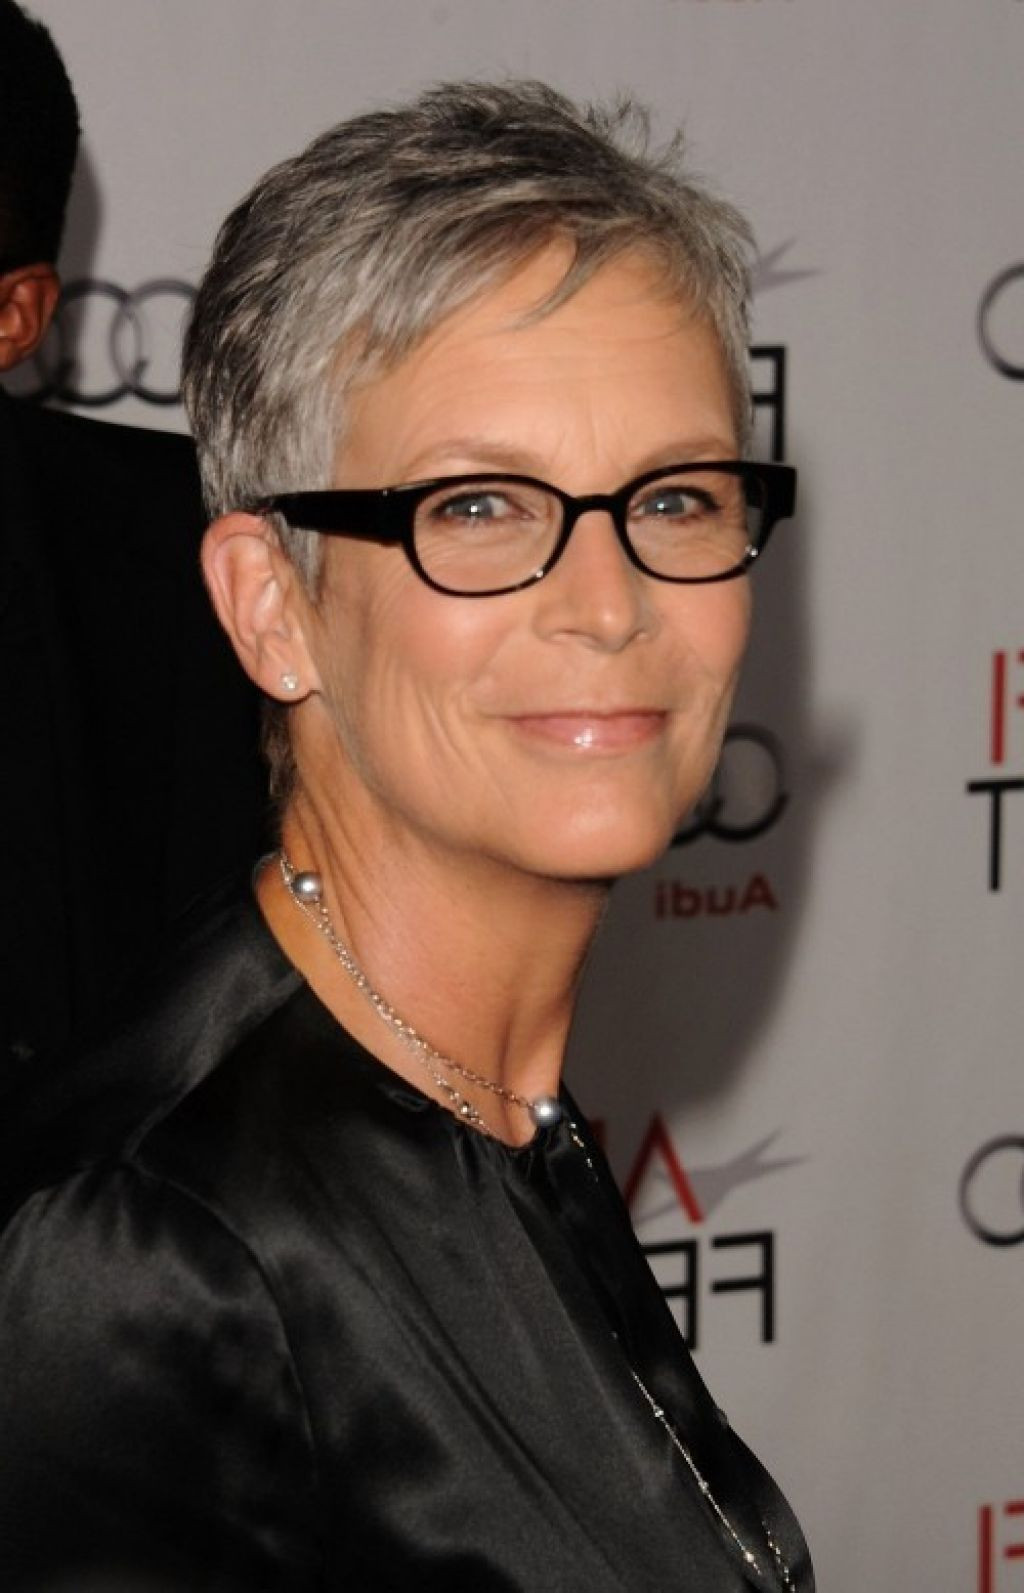 Short Haircuts For Women With Glasses
 TOP 10 Short haircuts for women over 40 with glasses